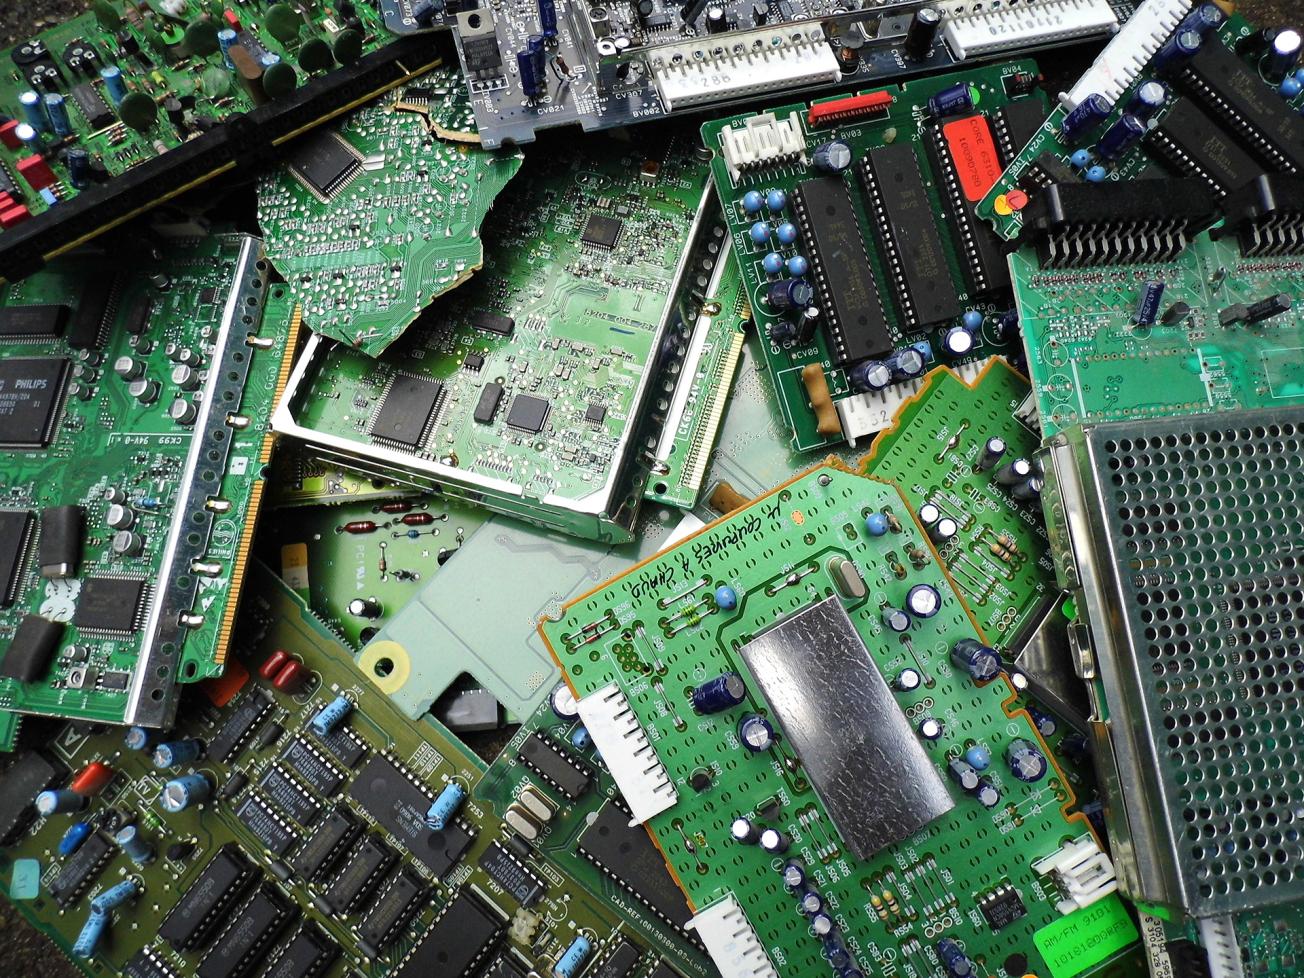 Electronic and electrical waste is one of the resources exploited in what is known as "urban mining" 